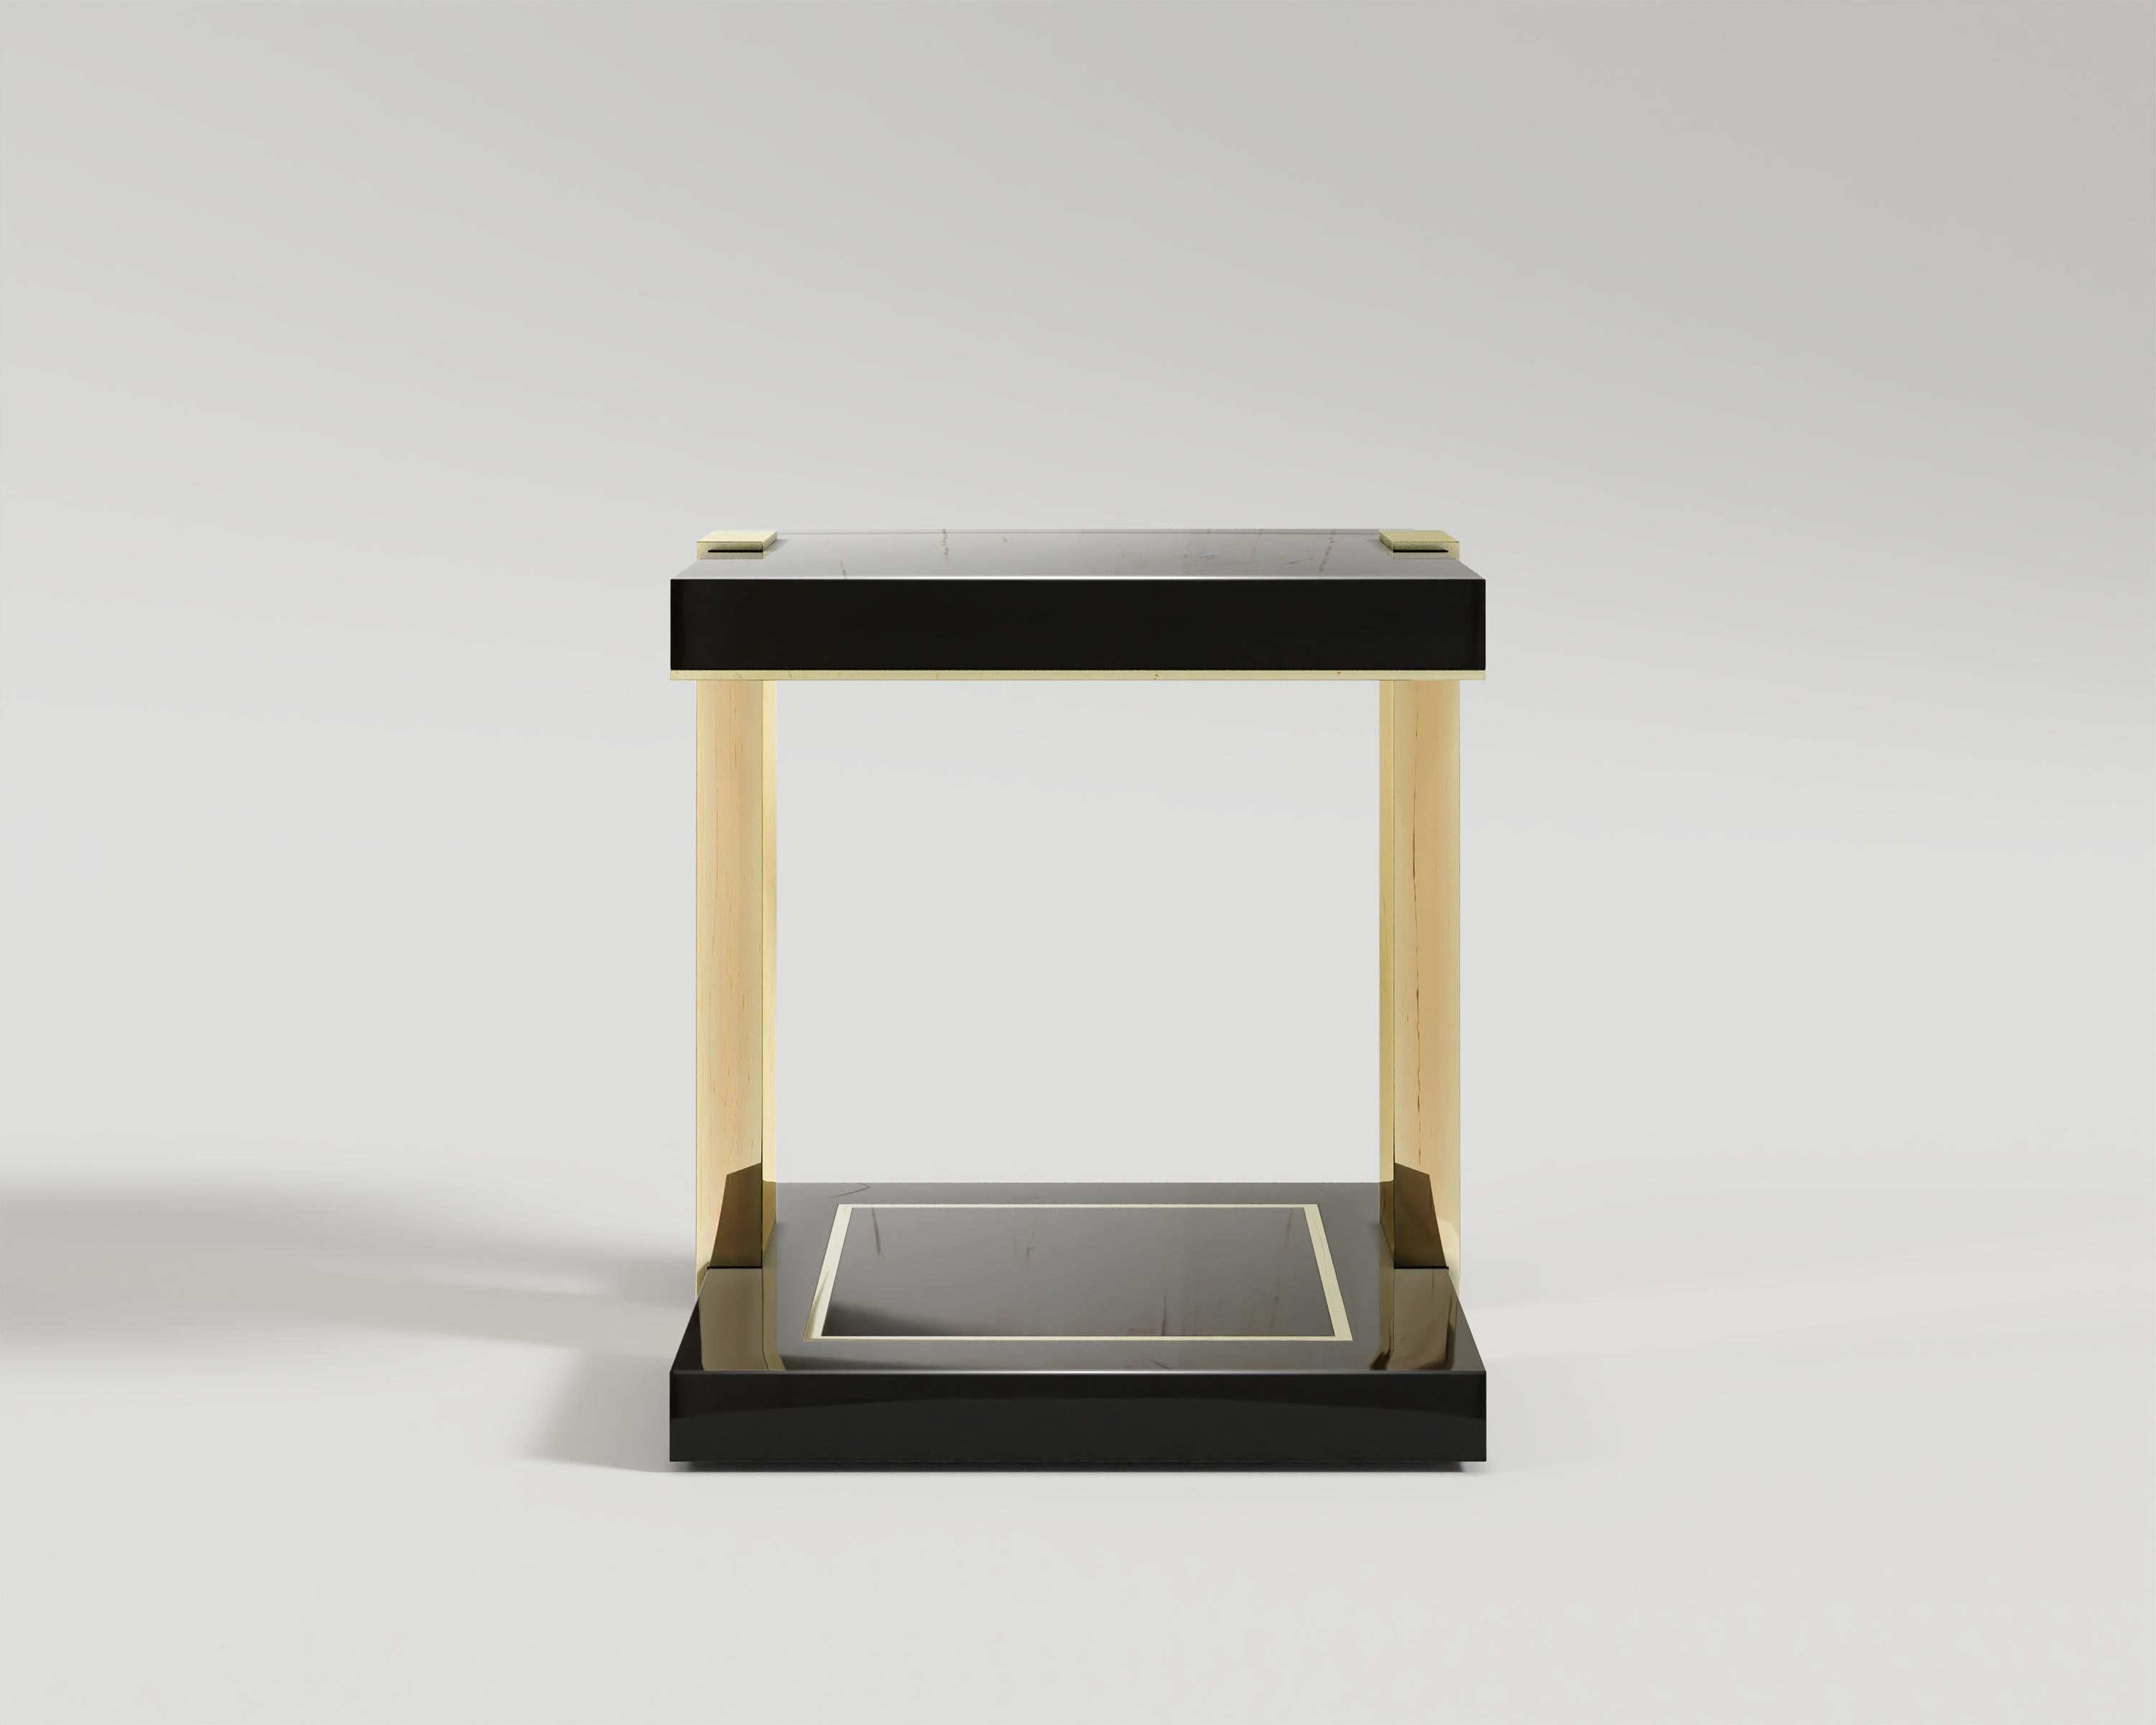 Twin Side Table

The Fragmin side table exudes sophistication with its cylindrical design, Patine/Polished bronze accents, and ziricote veneer materials. Its timeless elegance adds a touch of opulence to any space.

Materials and sizes are